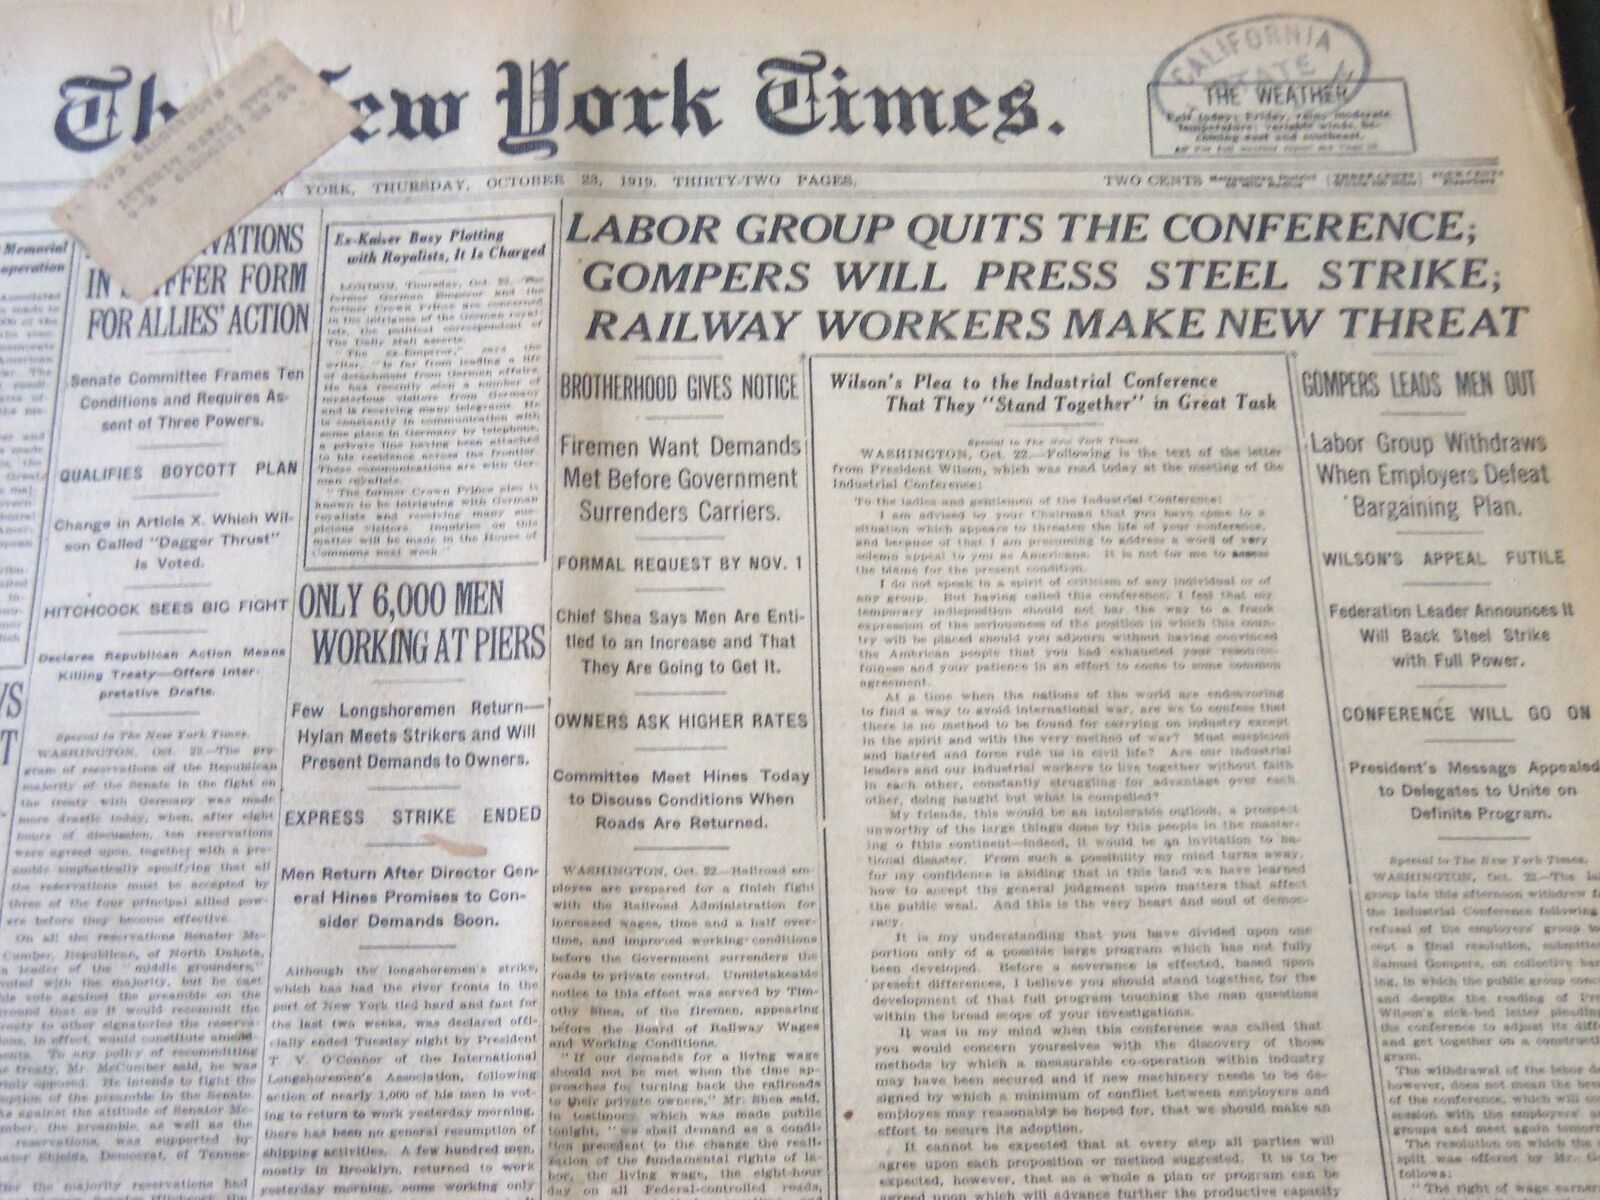 1919 OCTOBER 23 NEW YORK TIMES - GOMPERS WILL PRESS STEEL STRIKE - NT 6408